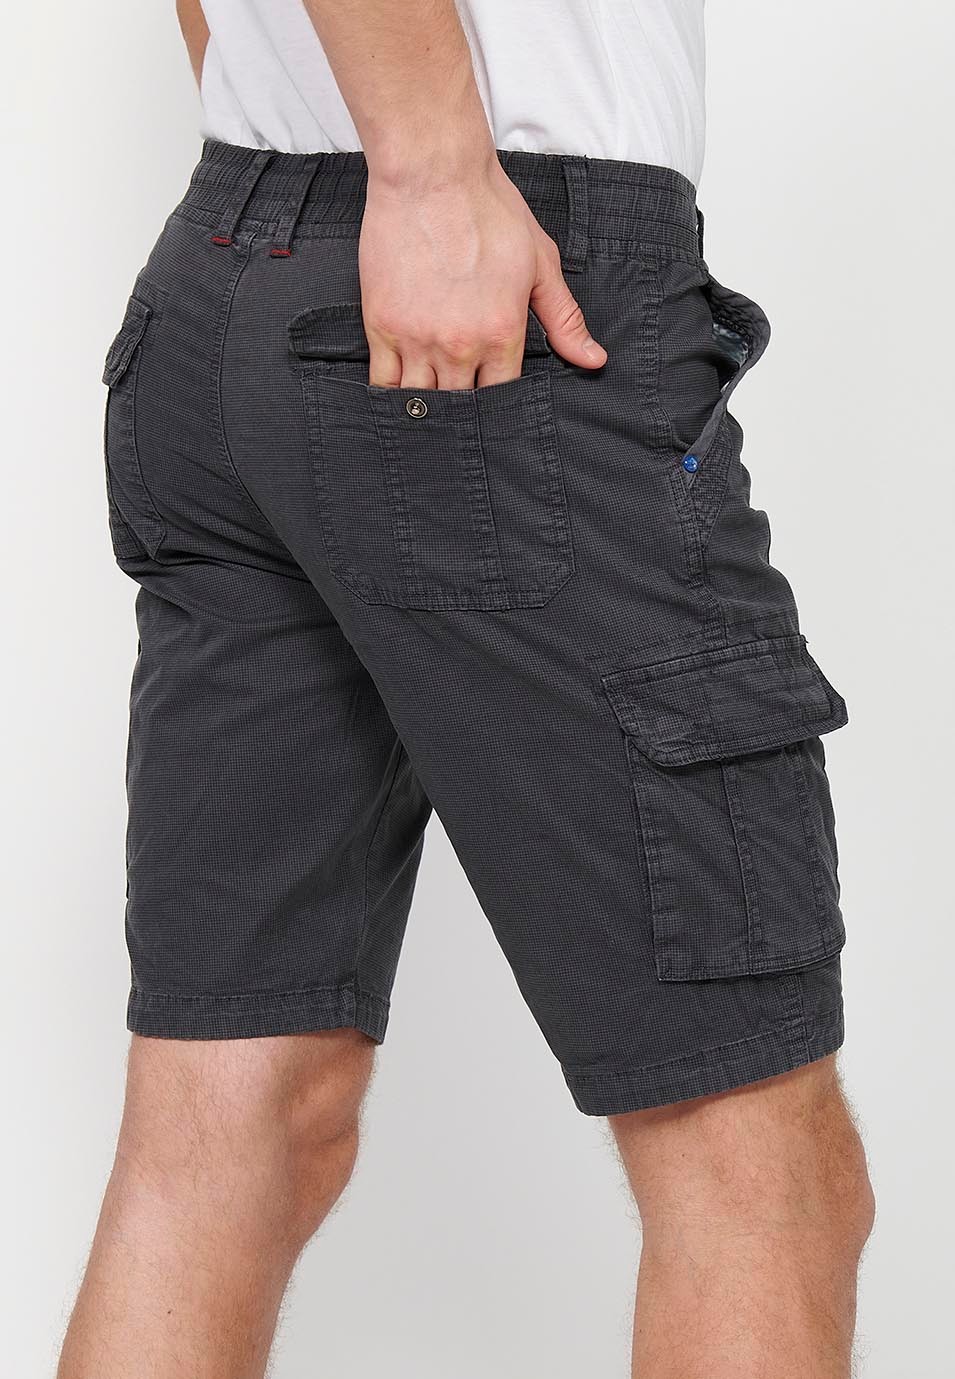 Cargo shorts with front closure with zipper and button and four pockets, two rear pockets with flap with two cargo pockets with flap and adjustable waist with drawstring in Gray for Men 2